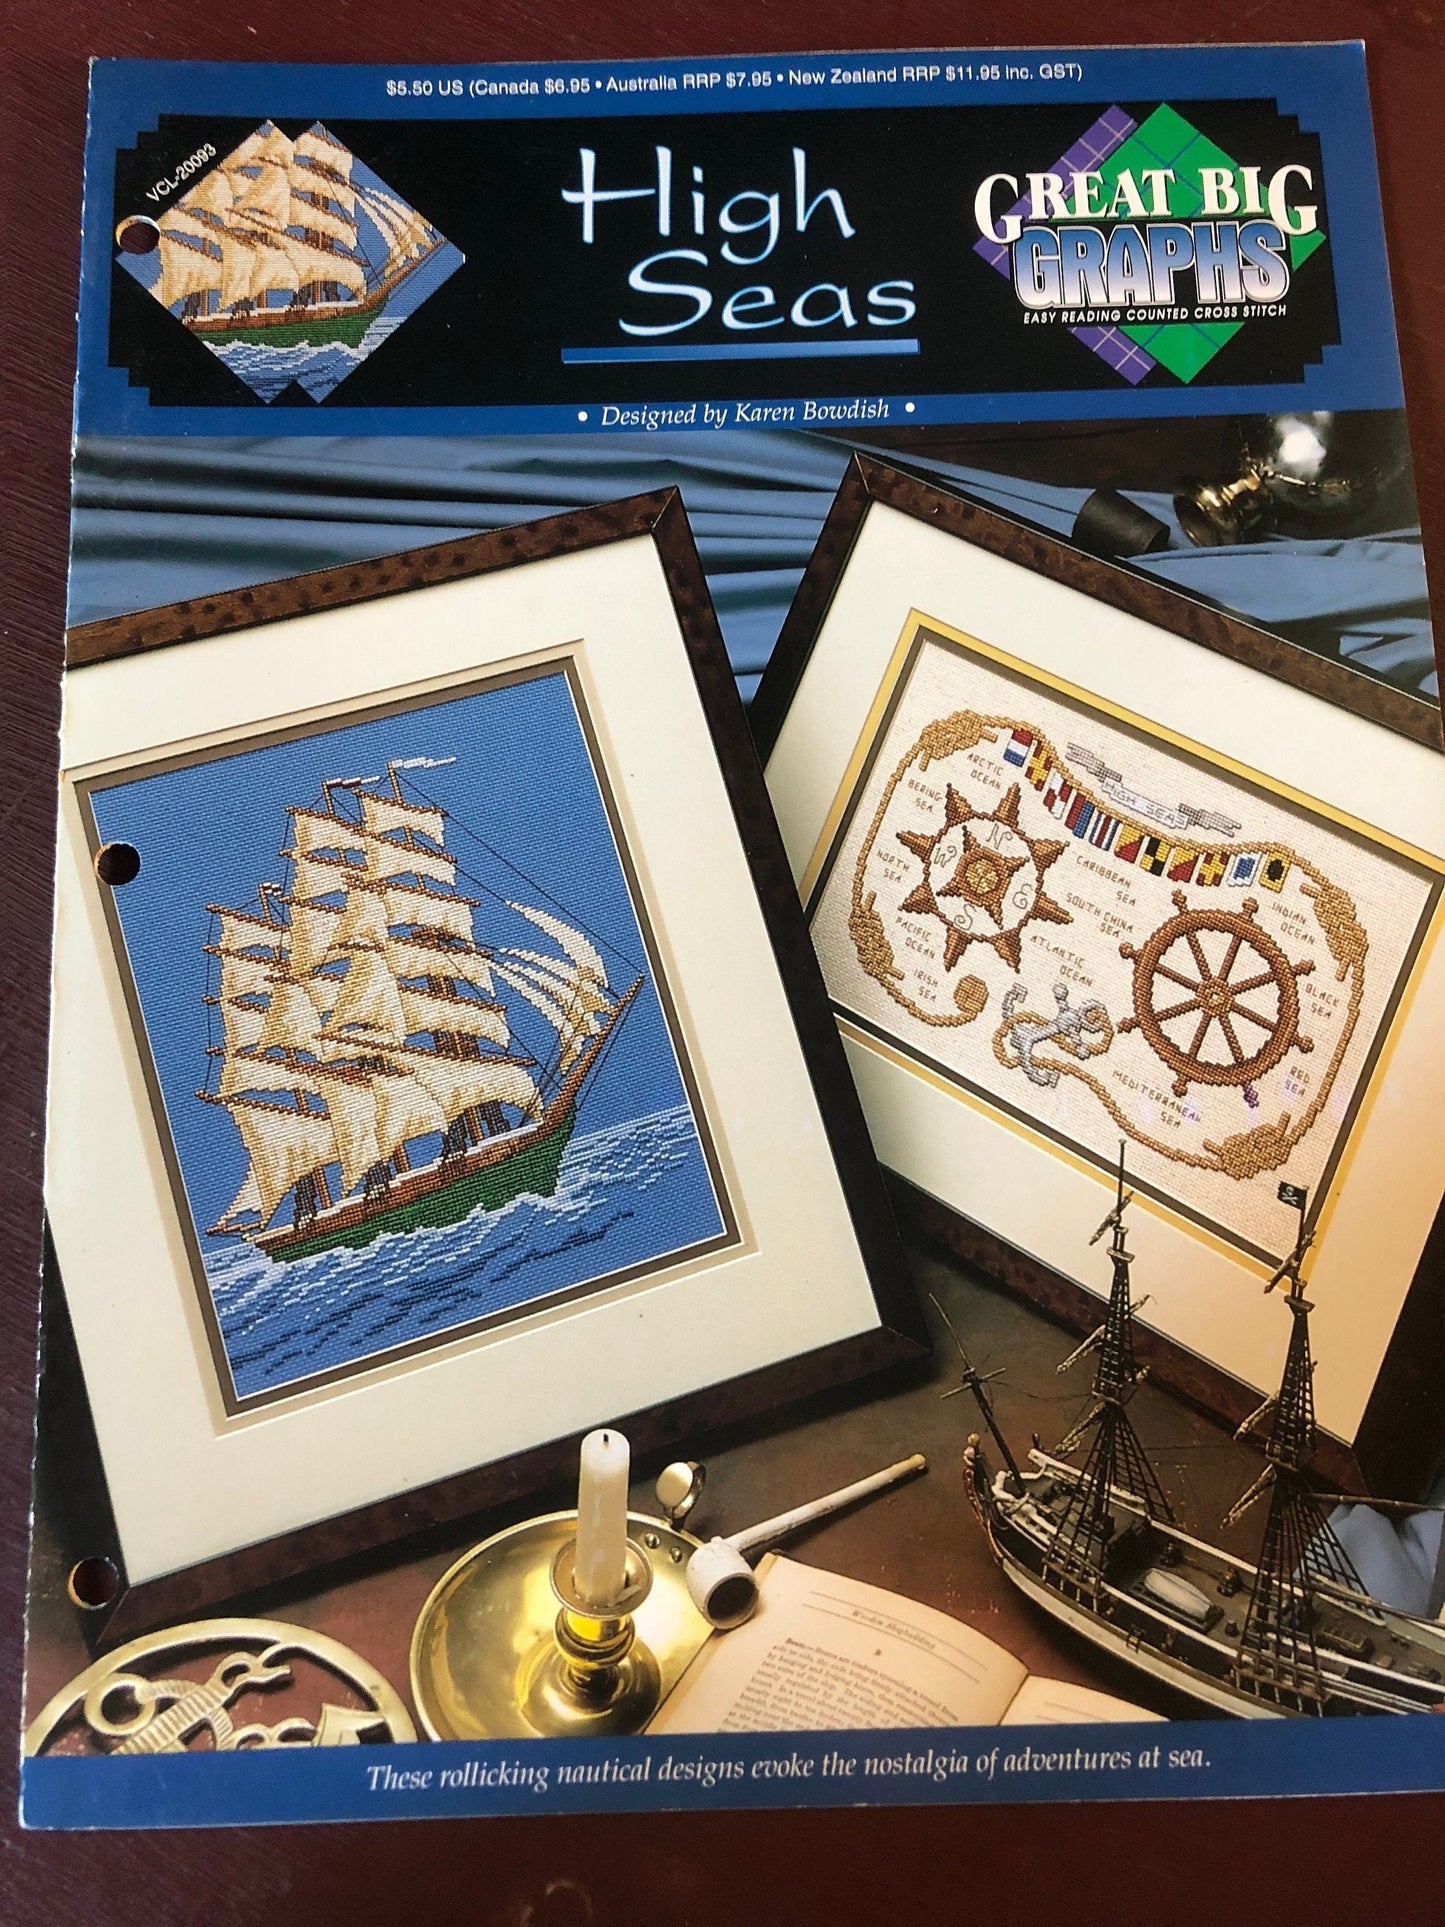 Great Big Graphs, High Seas, Counted, Cross Stitch Patterns